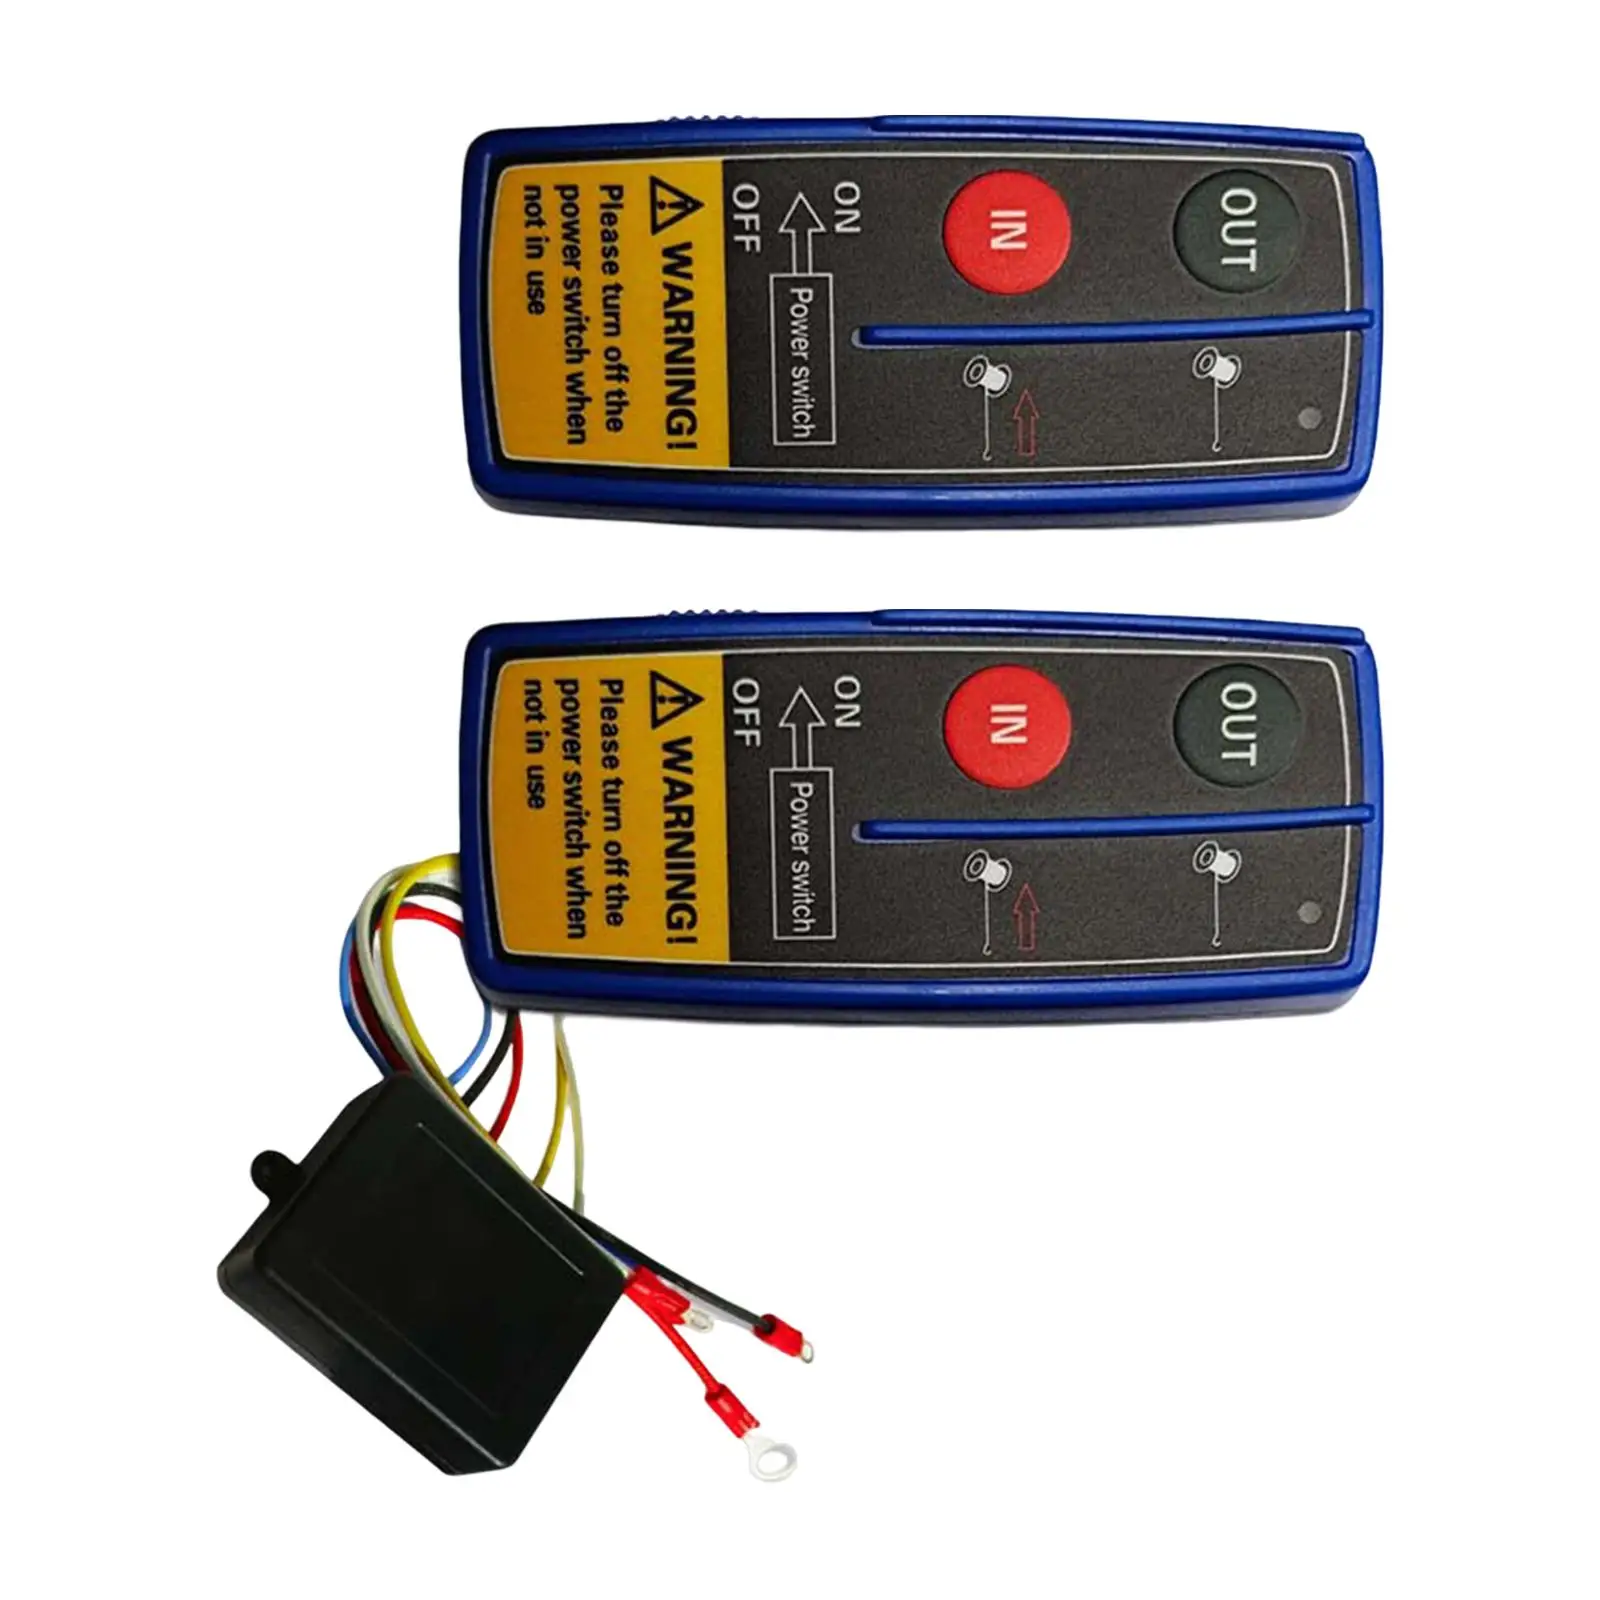 Wireless Winch Remote Control Kit Handset Switch with Indicator Light Winch Controller Switch for Vehicles ATV SUV Auto Car